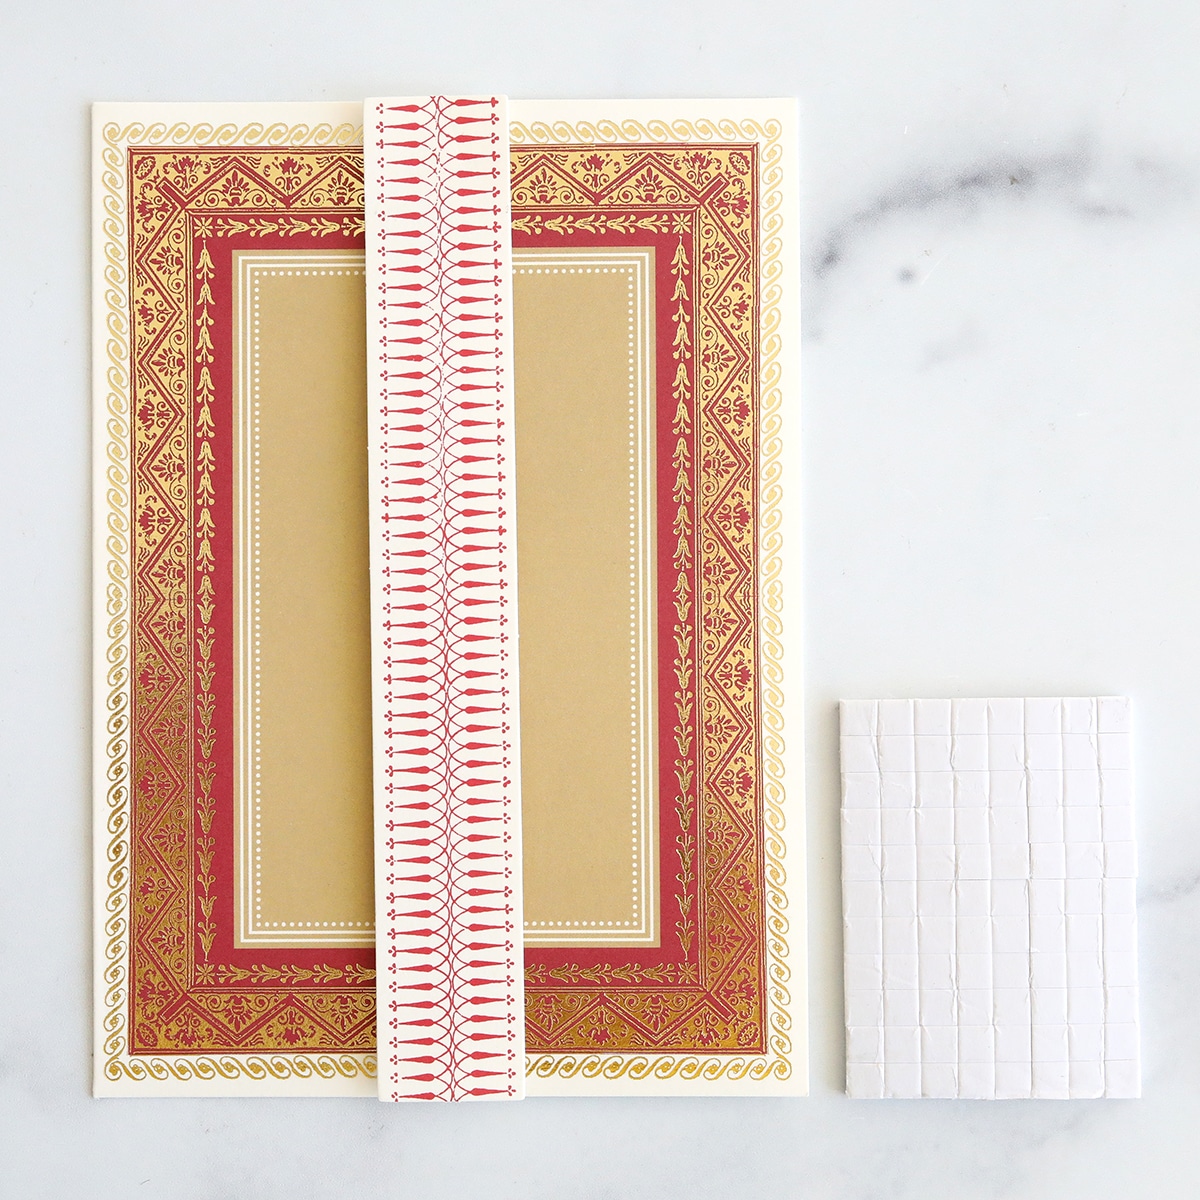 A card with a red and gold border and a piece of paper.